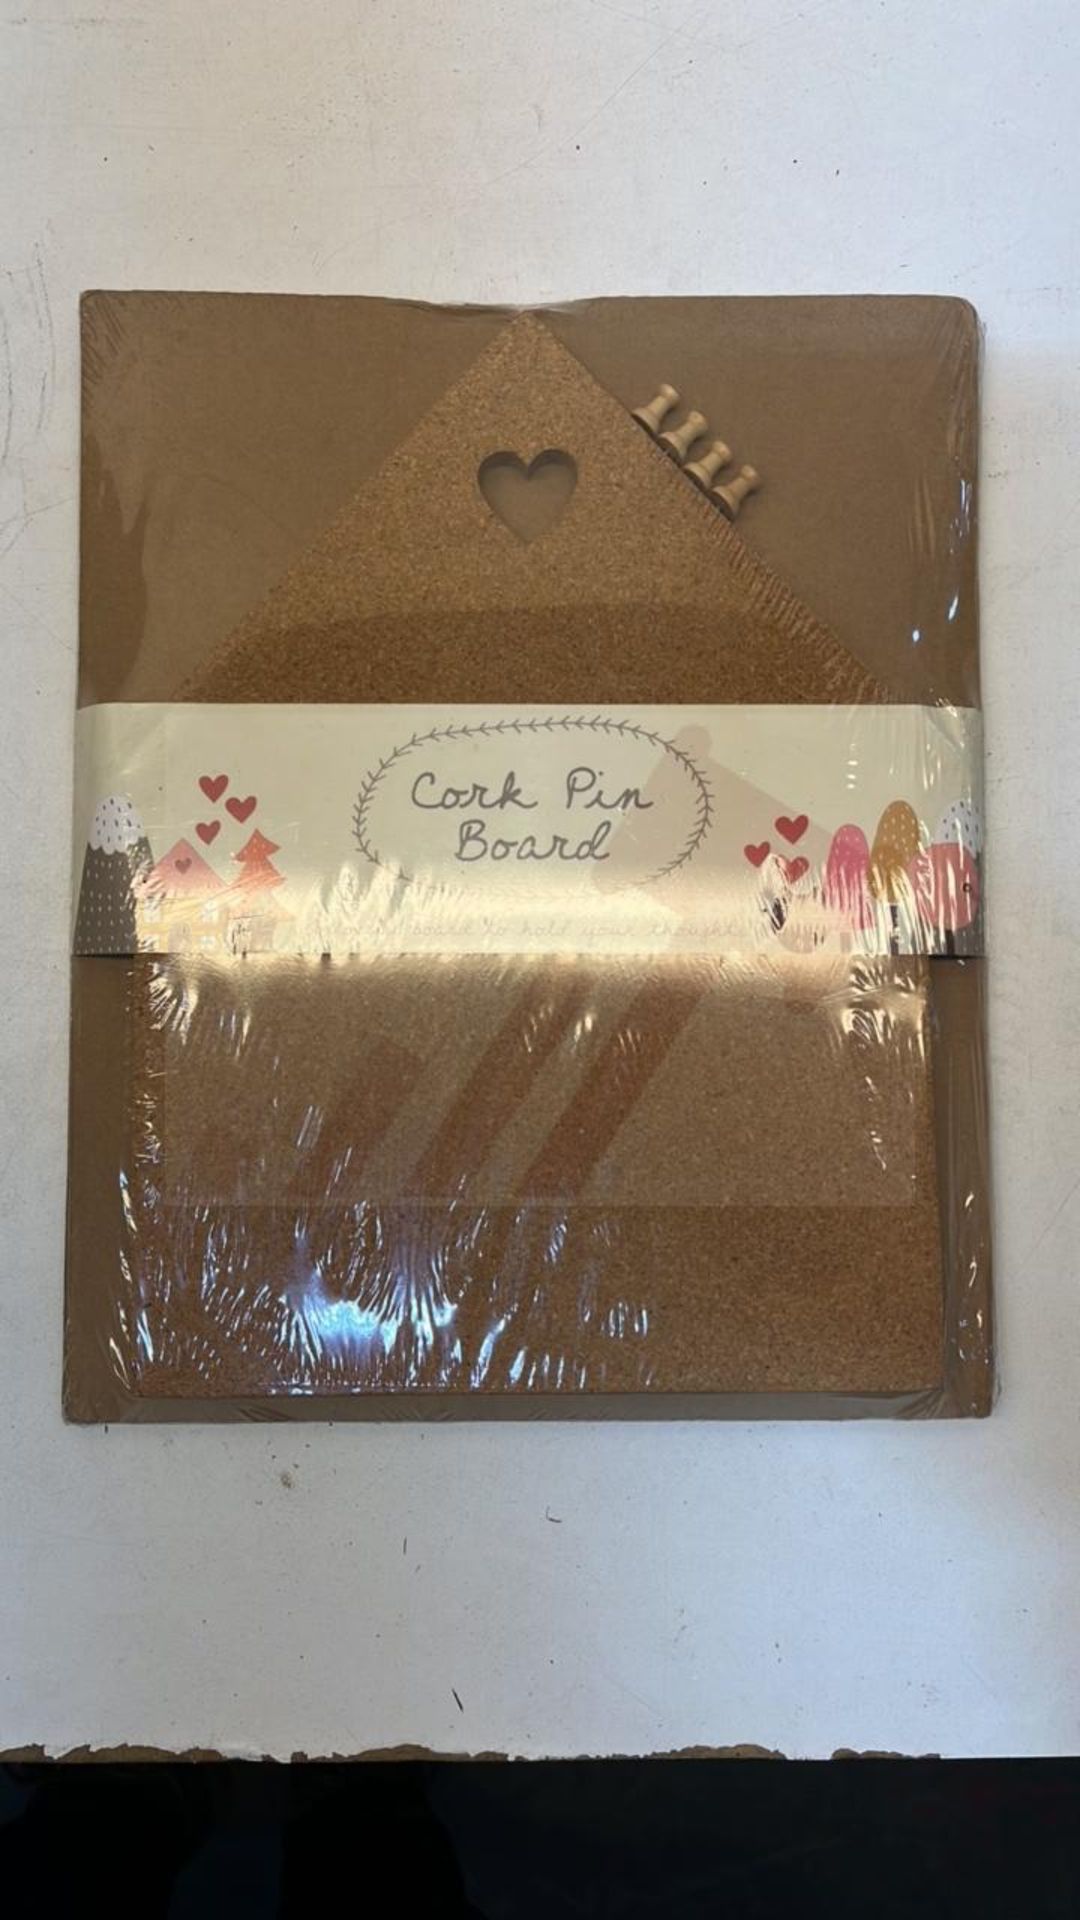 25 x Sass And Belle Cork Pin Boards - Image 2 of 2